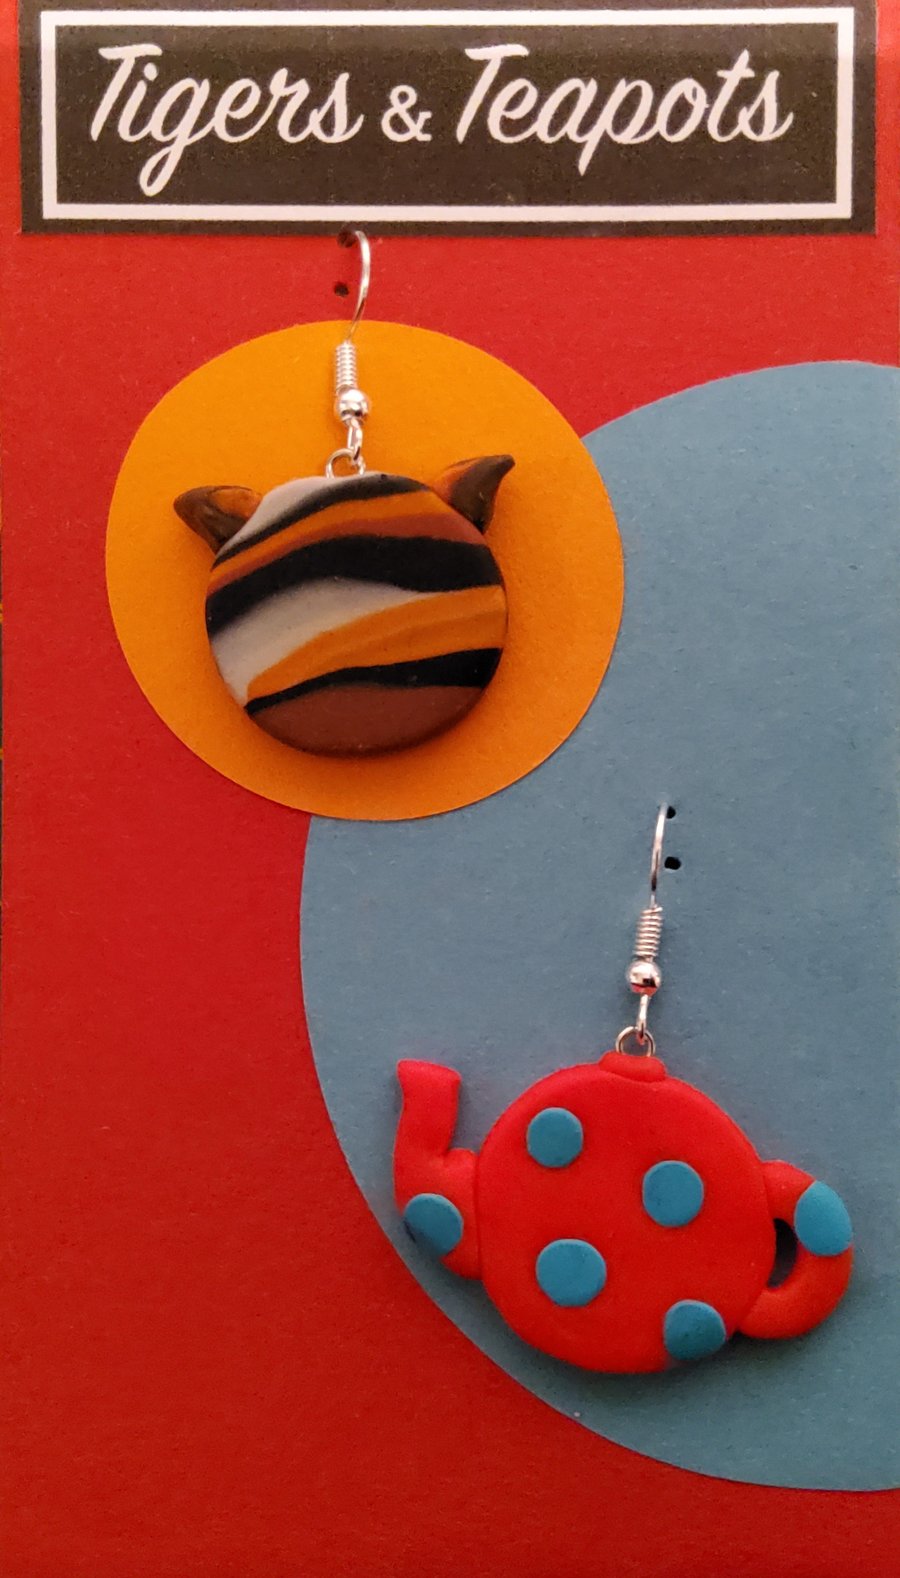 Tigers & Teapots - Earrings to party in!